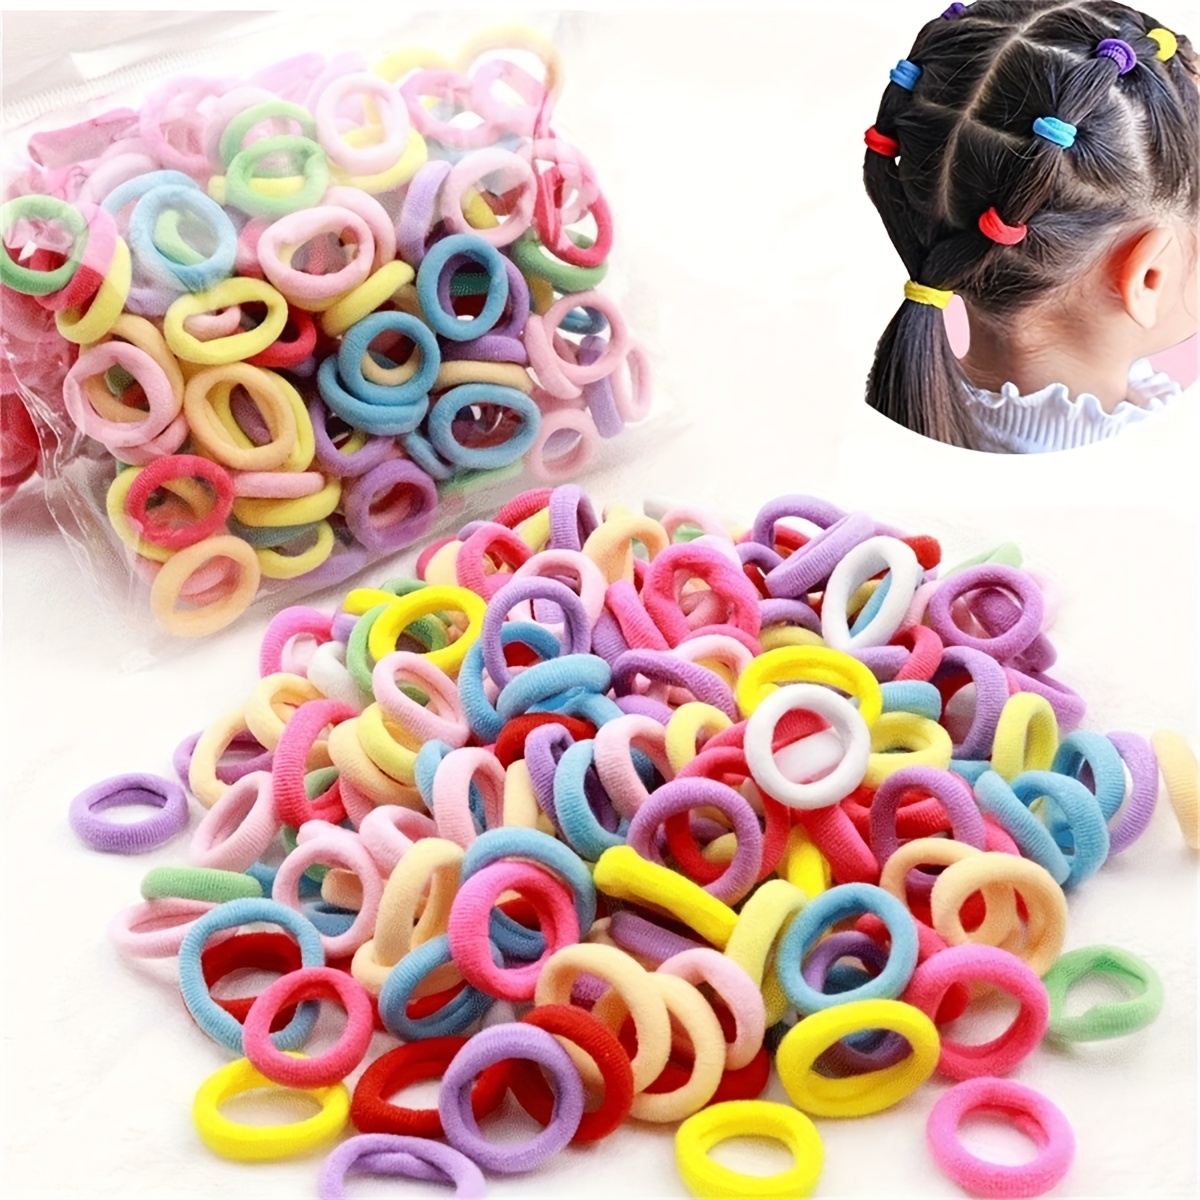 Is That The New 2200pcs Random Color Hair Tie ??